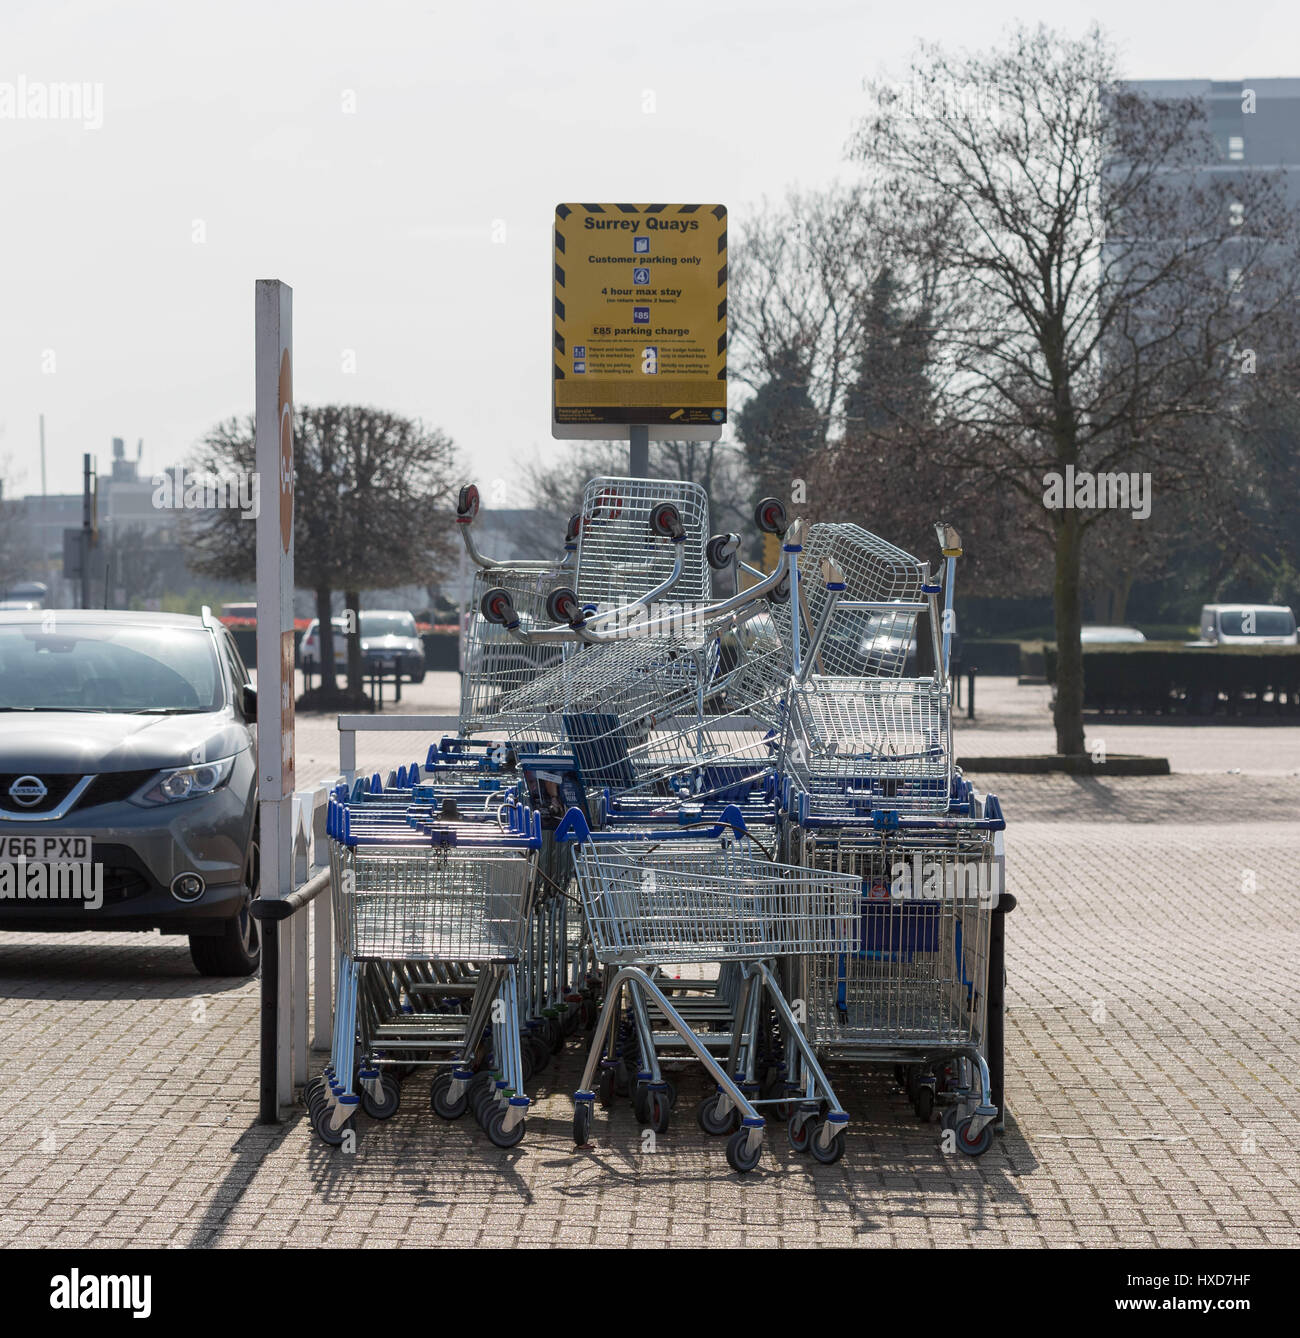 London, UK. 28th Mar, 2017. New £1 coins enter circulation, replacing the old pound. Tesco has unlocked 100,000 coin-operated trolleys after it failed to convert them in time for the launch of the new £1 coin leading to trolley vandalism. Tesco trolleys seen here in a south east London car park piled up. The introduction of the coin has also meant car parking meters and vending machines have had to be converted. Credit: Guy Corbishley/Alamy Live News Stock Photo